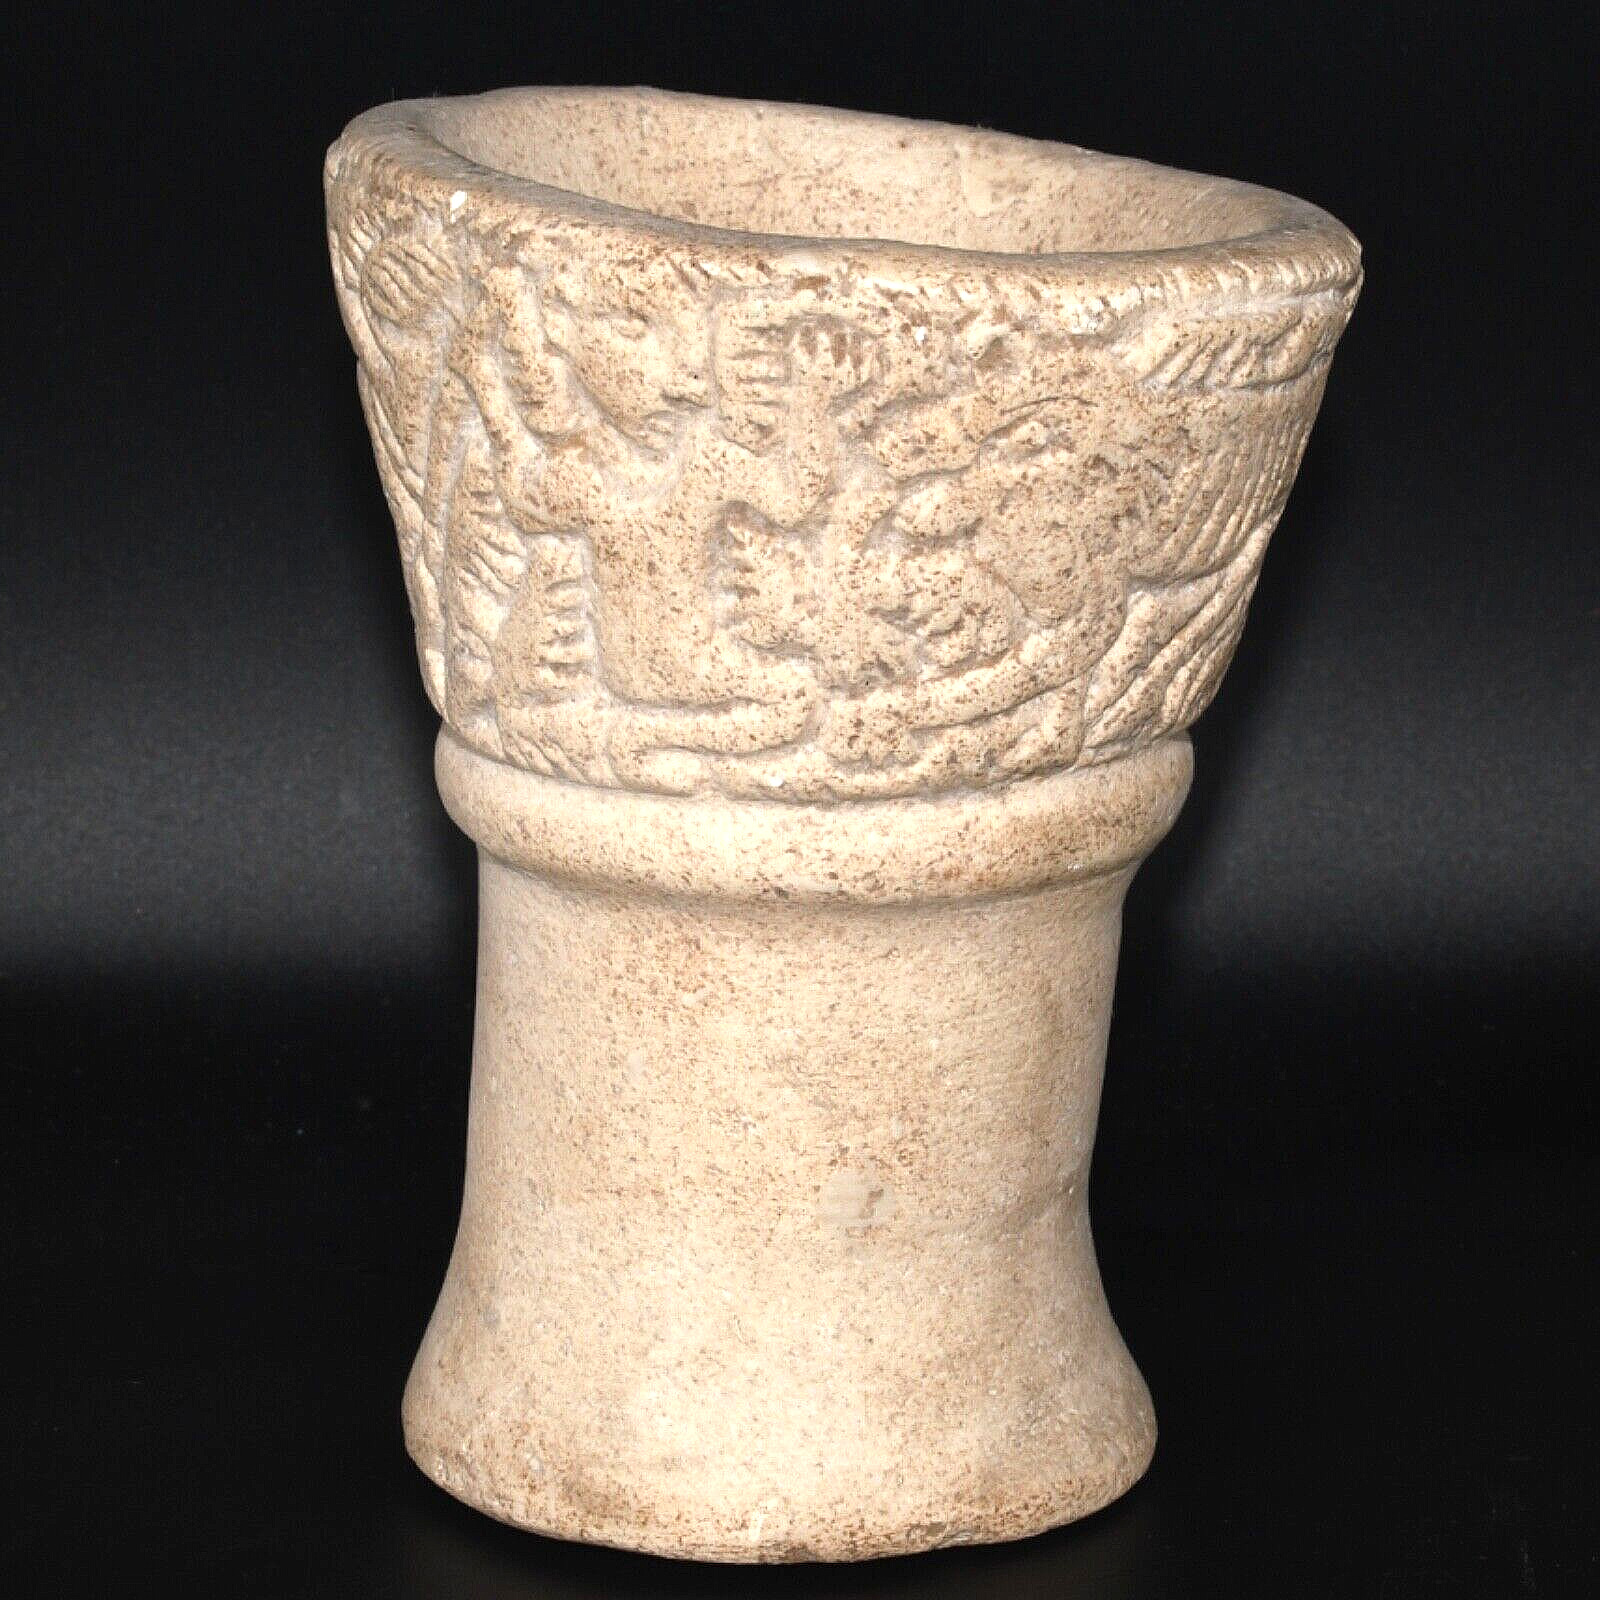 Genuine Ancient Bactrian Stone Chalice with Engravings Circa 2000 - 1500 BC